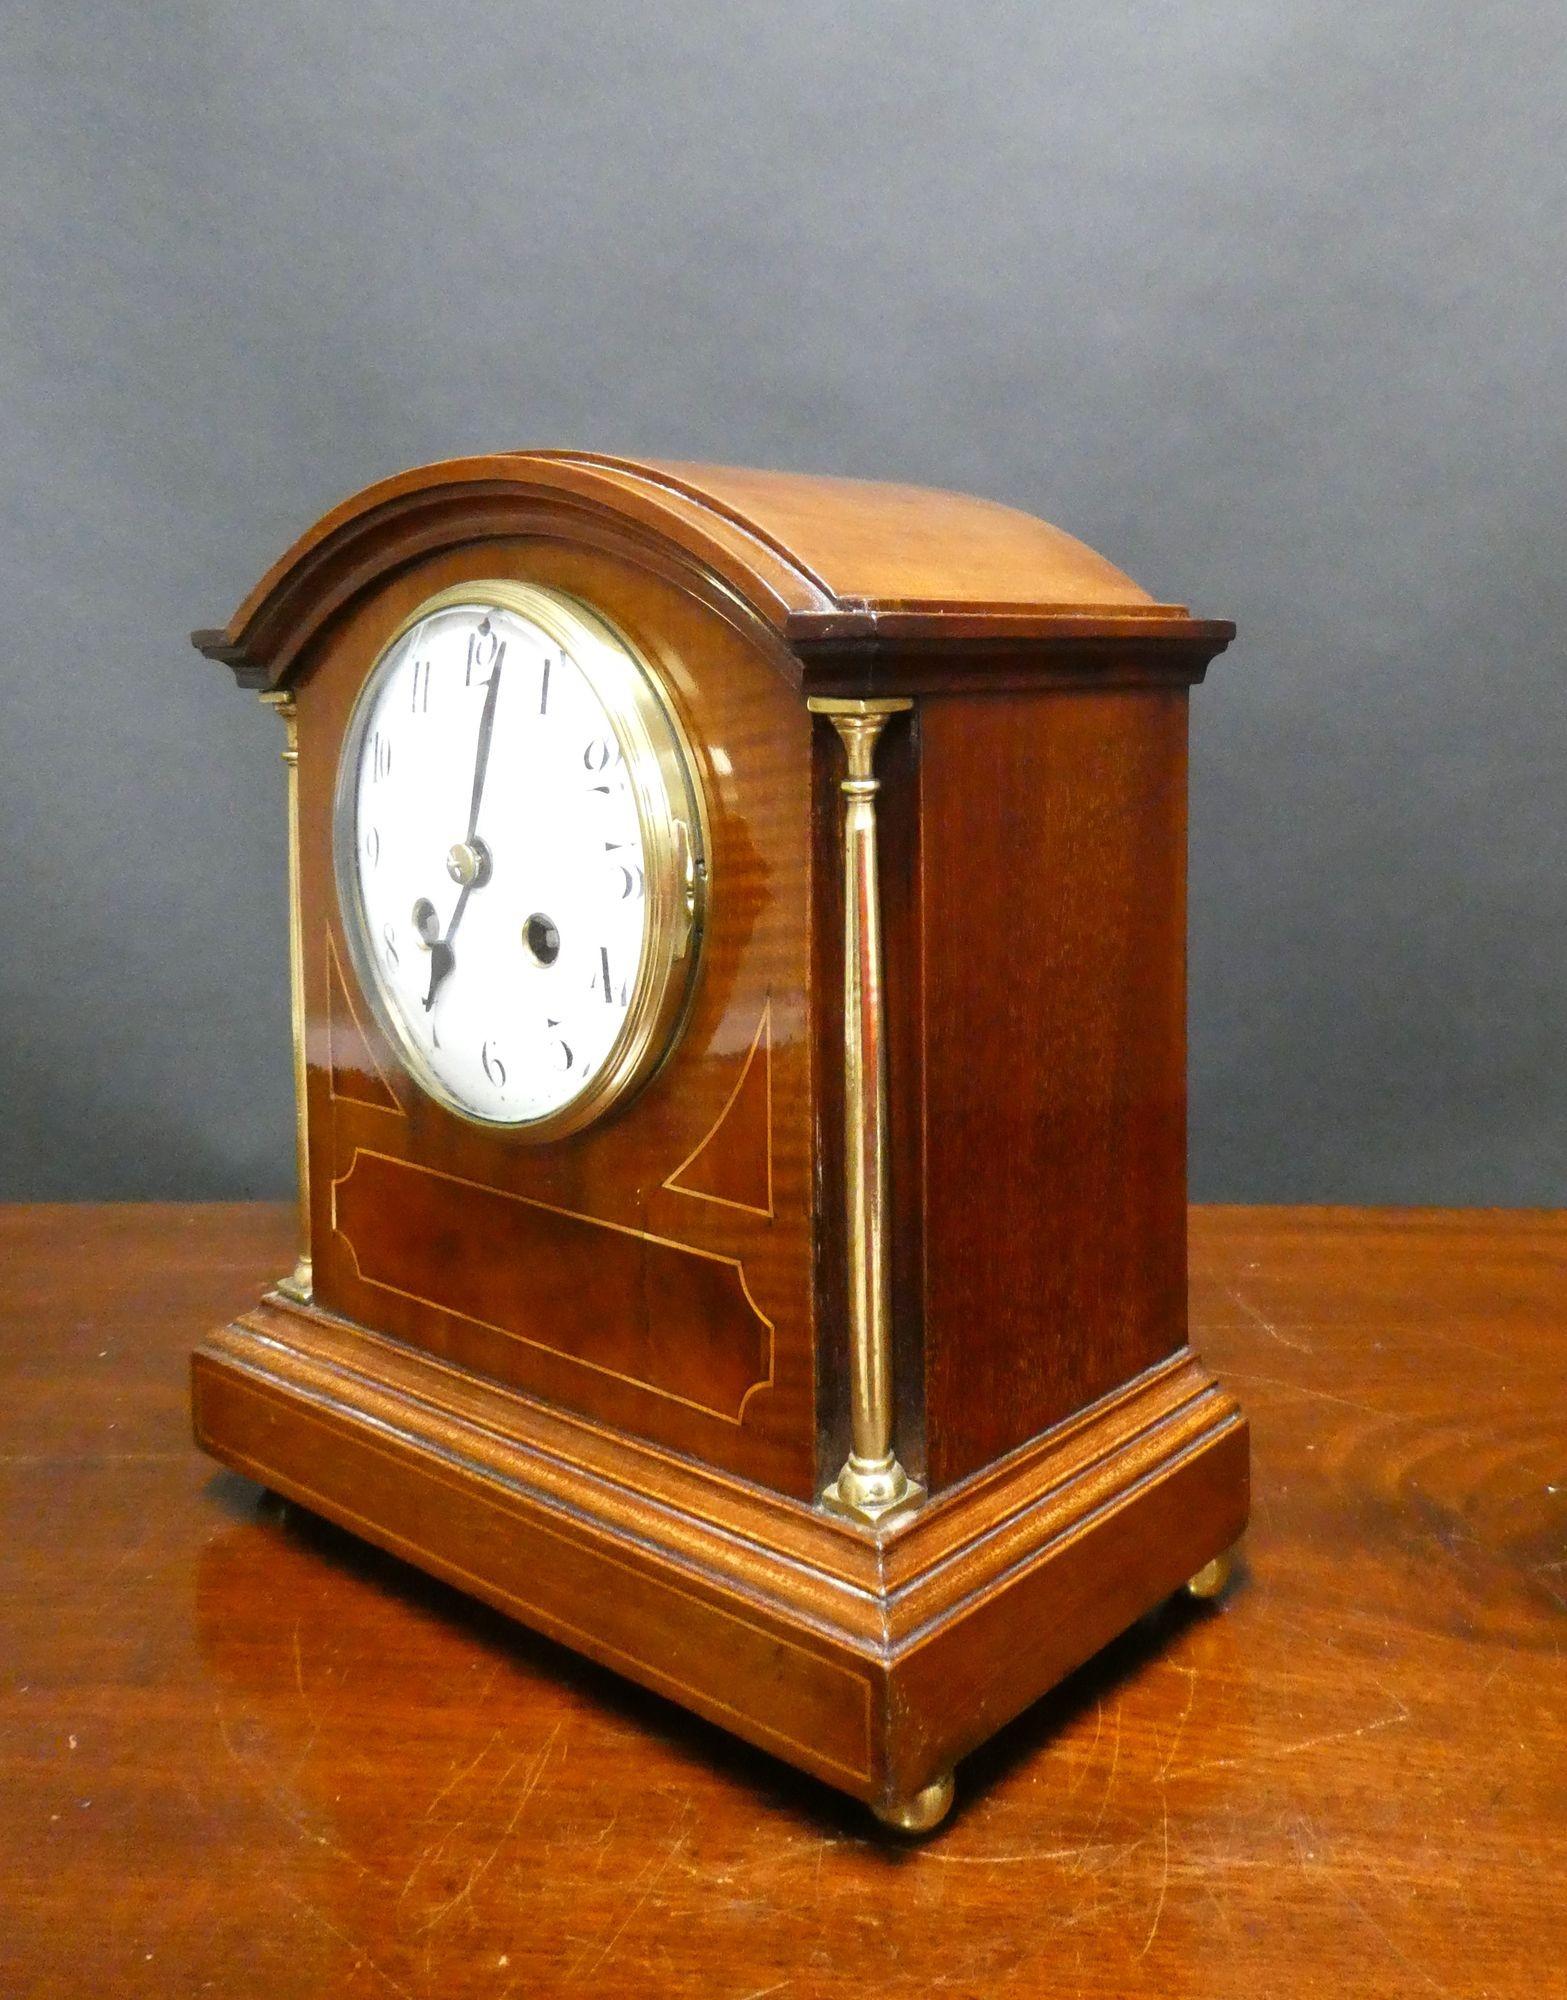 Edwardian Mahogany Inlaid Mantel Clock

Edwardian mantel clock housed in a break arch mahogany case with walnut panels and satinwood line stringing , brass pillars to either side with a stepped plinth resting on four brass bun feet.
Brass bezel with